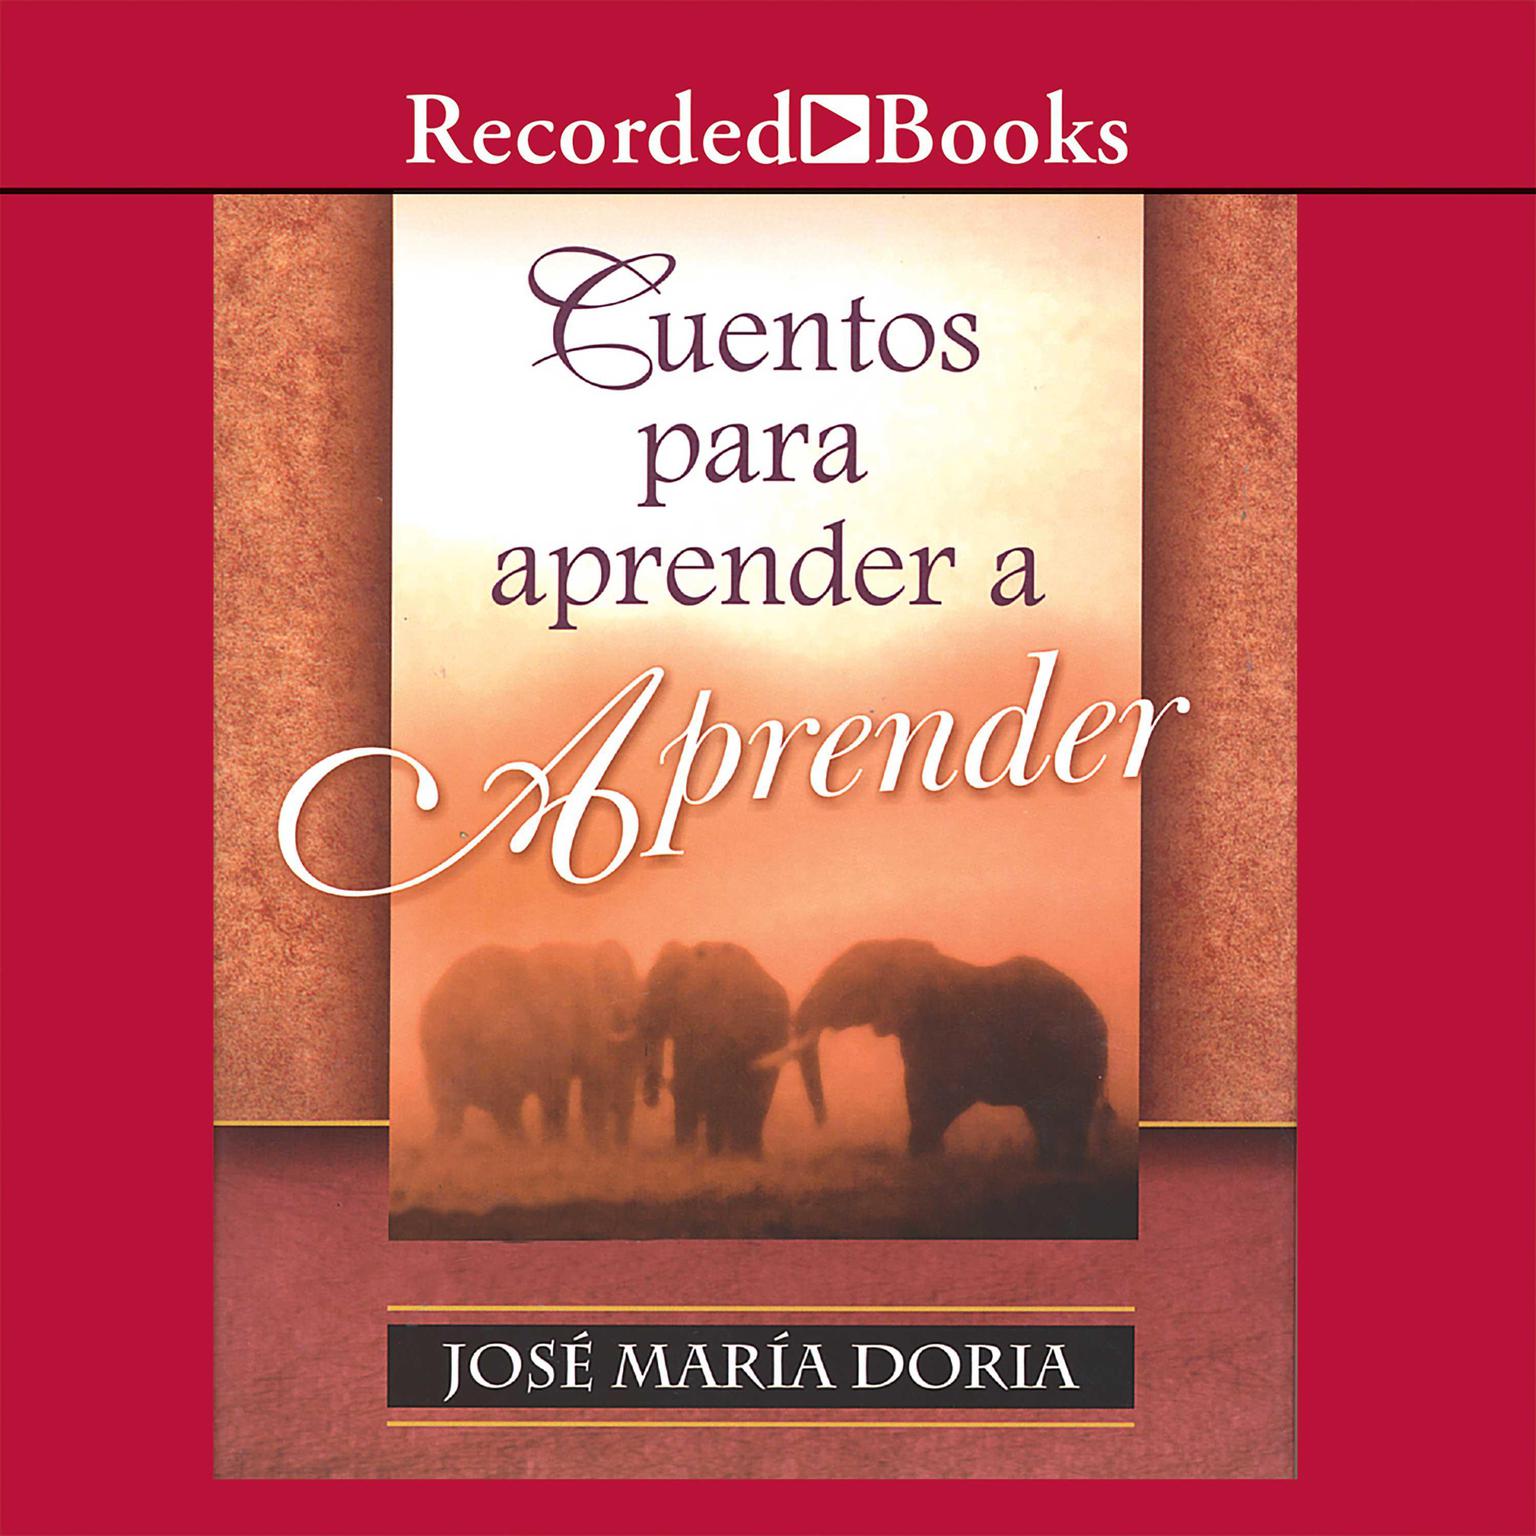 Cuentos para aprender a aprend (Stories to Learn about Learning) Audiobook, by Jose Maria Doria